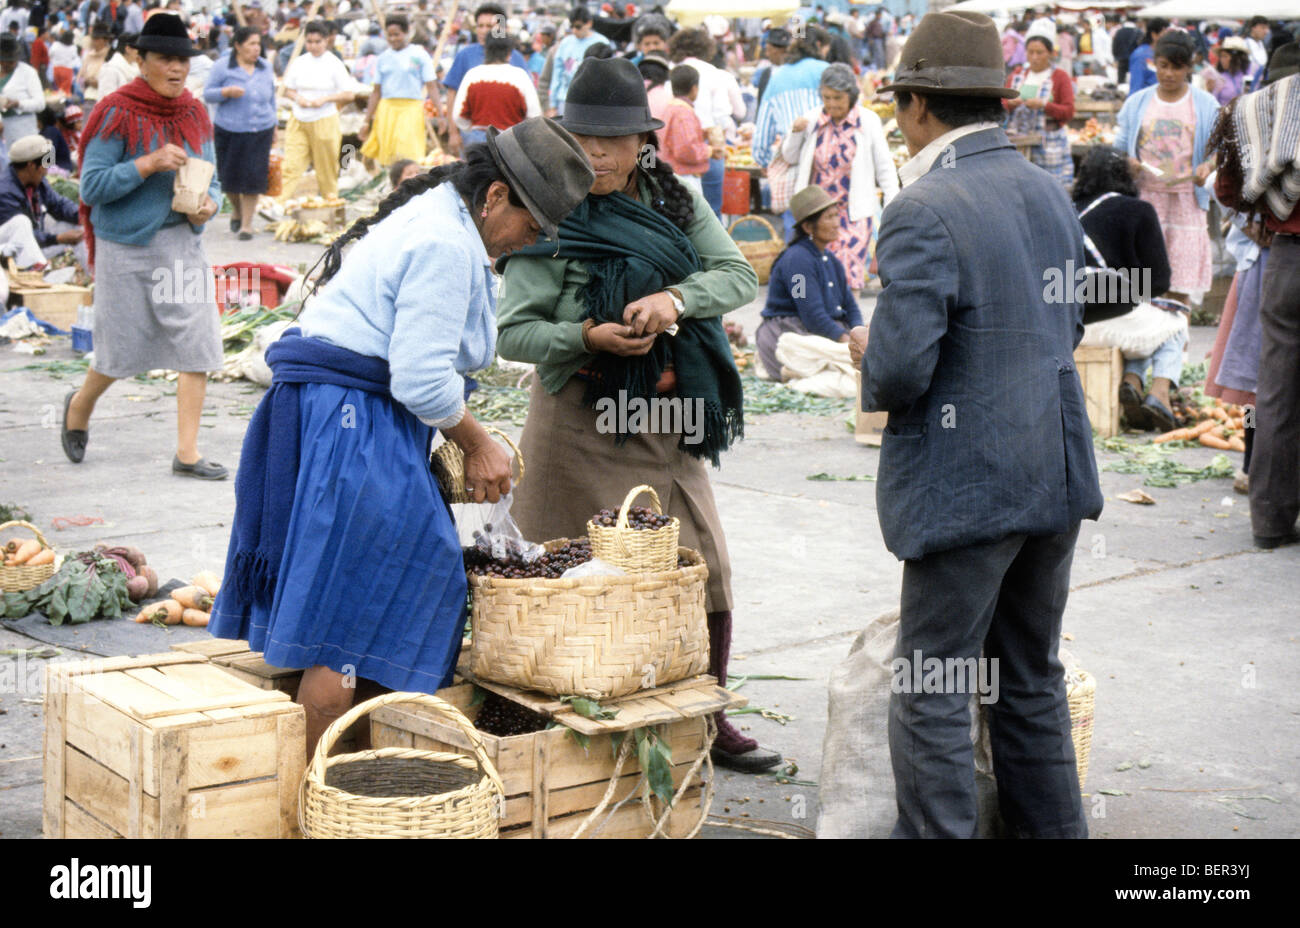 Woman in traditional inca dress tips some dark berries into bag for customer. Local market upland ecuador. Stock Photo